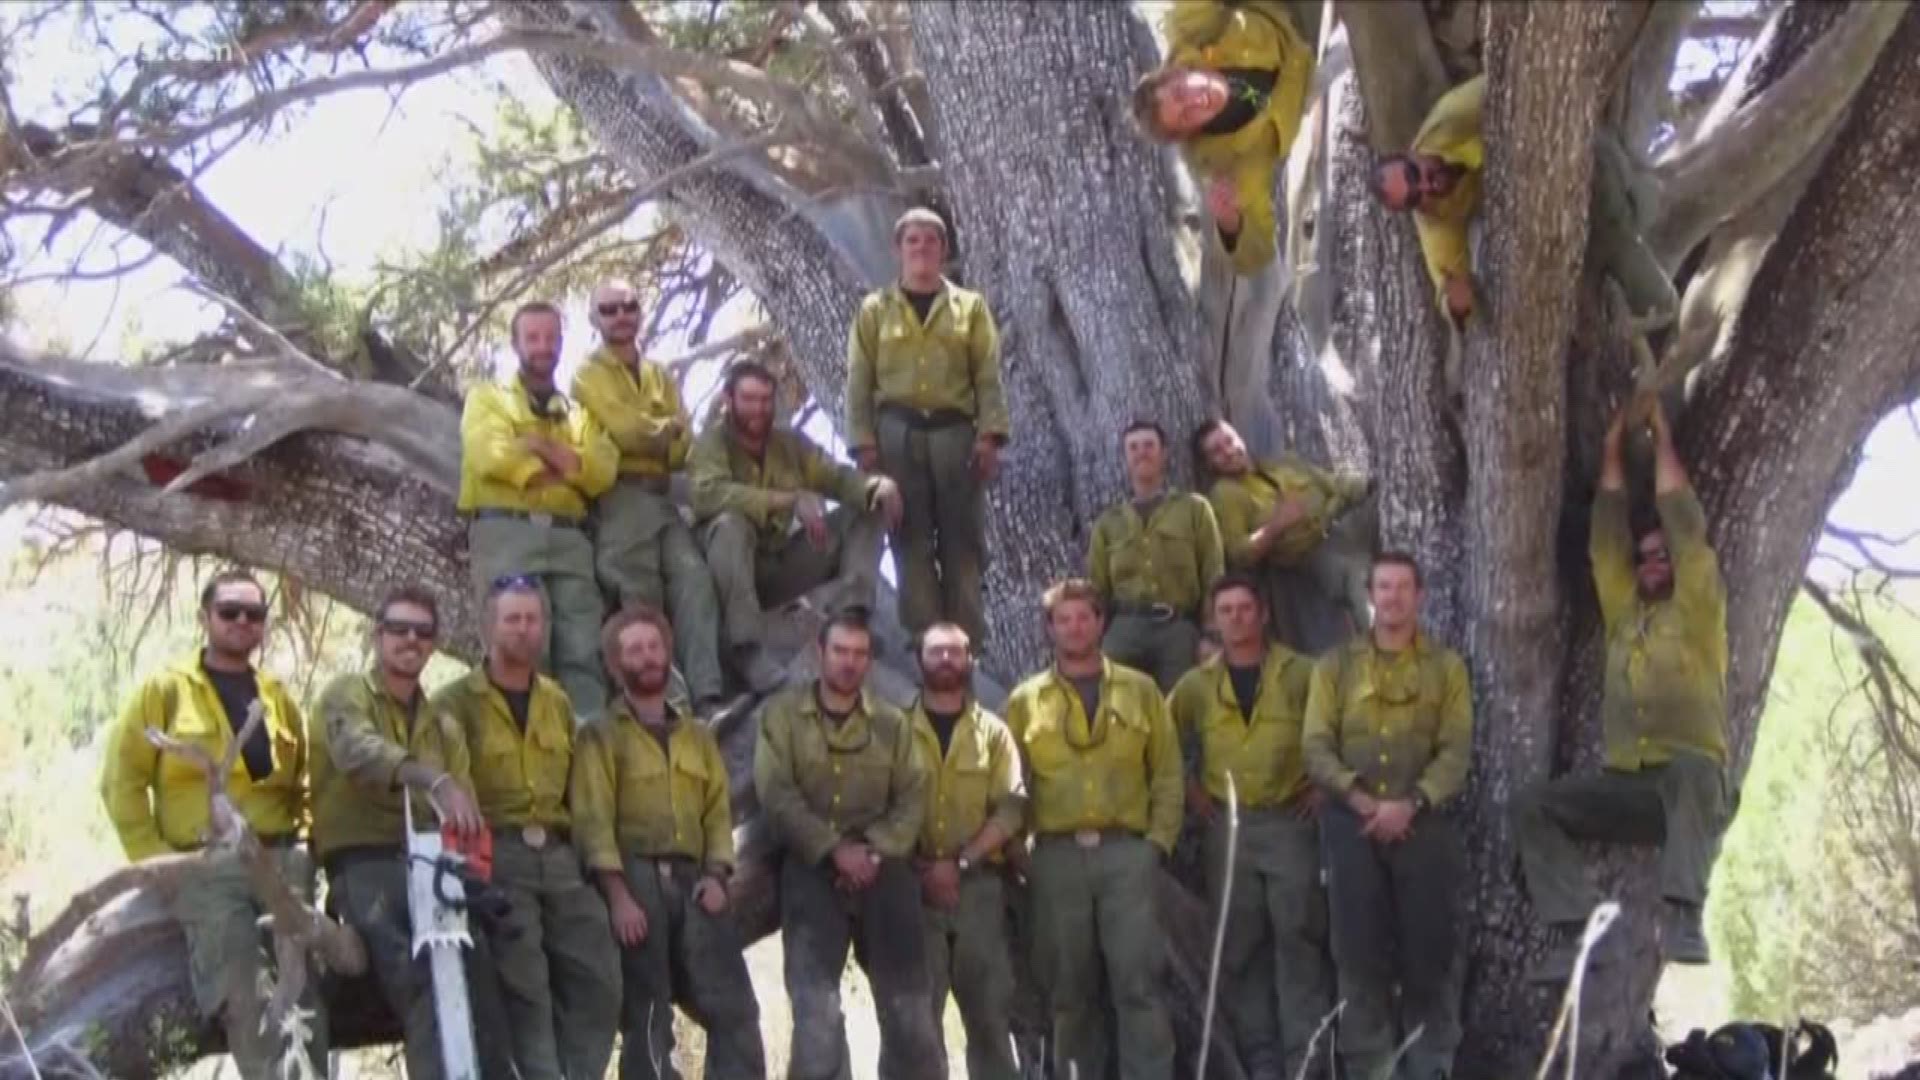 June 30 marks five years since 19 wildland firefighters died in Arizona.